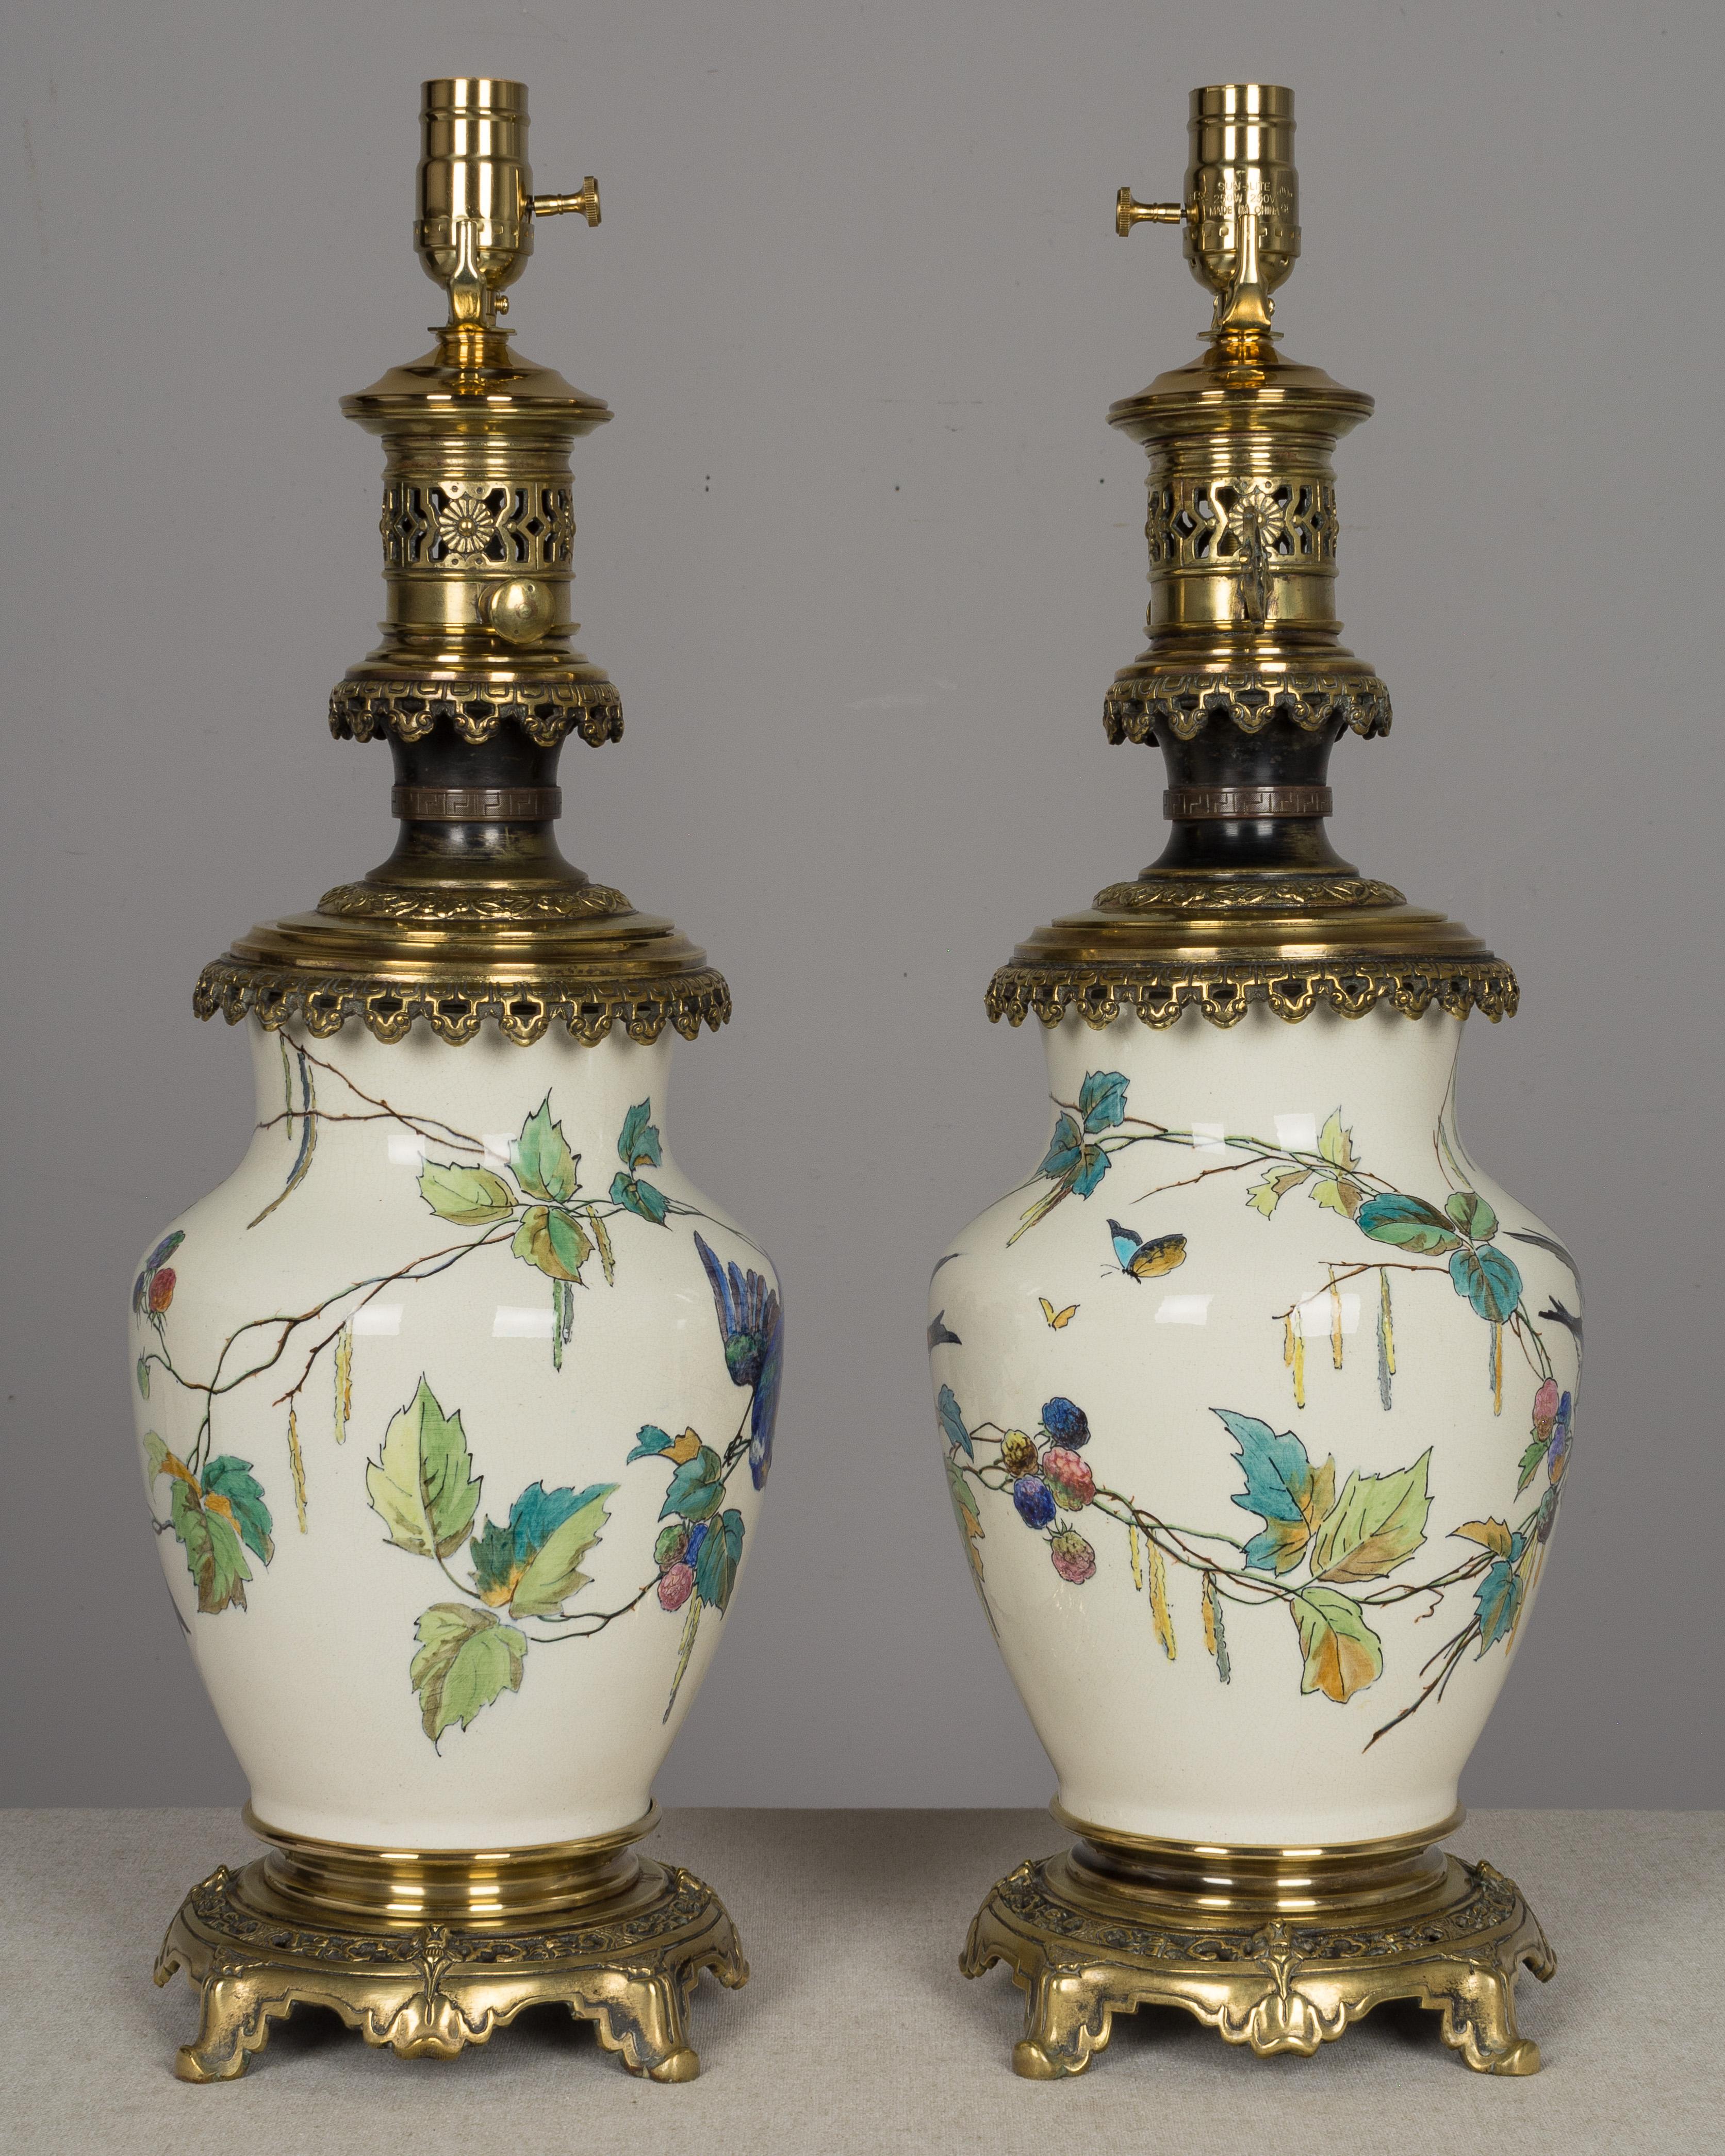 Japonisme Pair of Bronze-Mounted Sevres Ceramic Lamps in the Manner of Theodore Deck